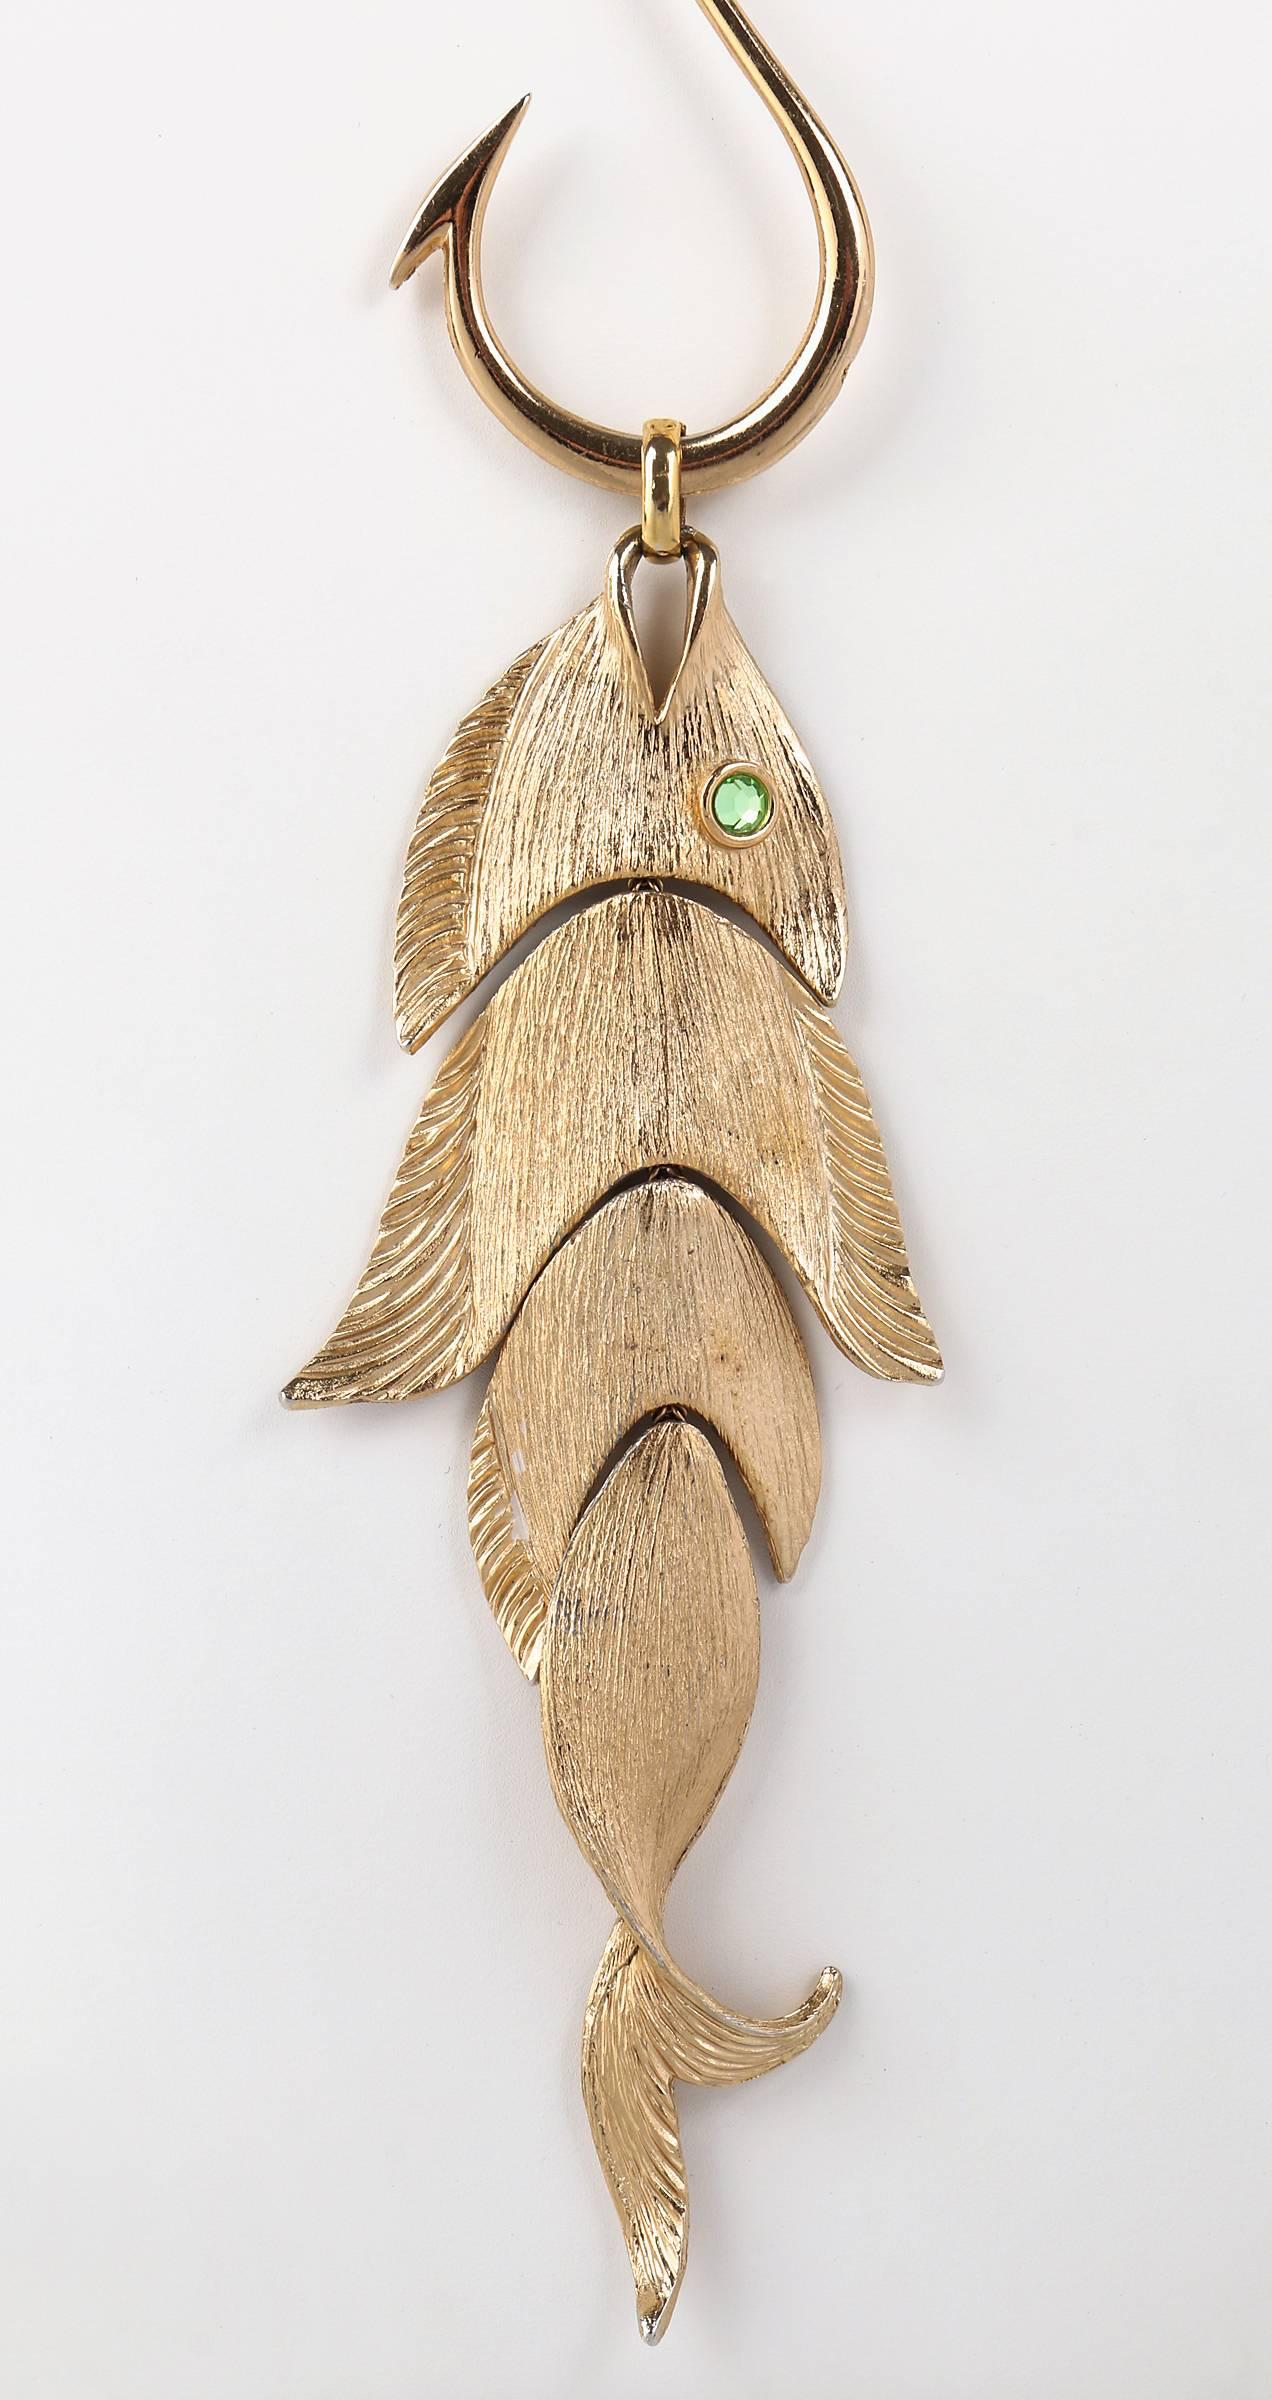 Vintage 1970's Napier statement gold tone fish on hook pendant on chunky gold tone chain.  Fish pendant is segmented into 4 pieces.  Matte gold tone is brushed and has carved detail.  Fish's eye is a faceted Peridot colored rhinestone.  Pendant